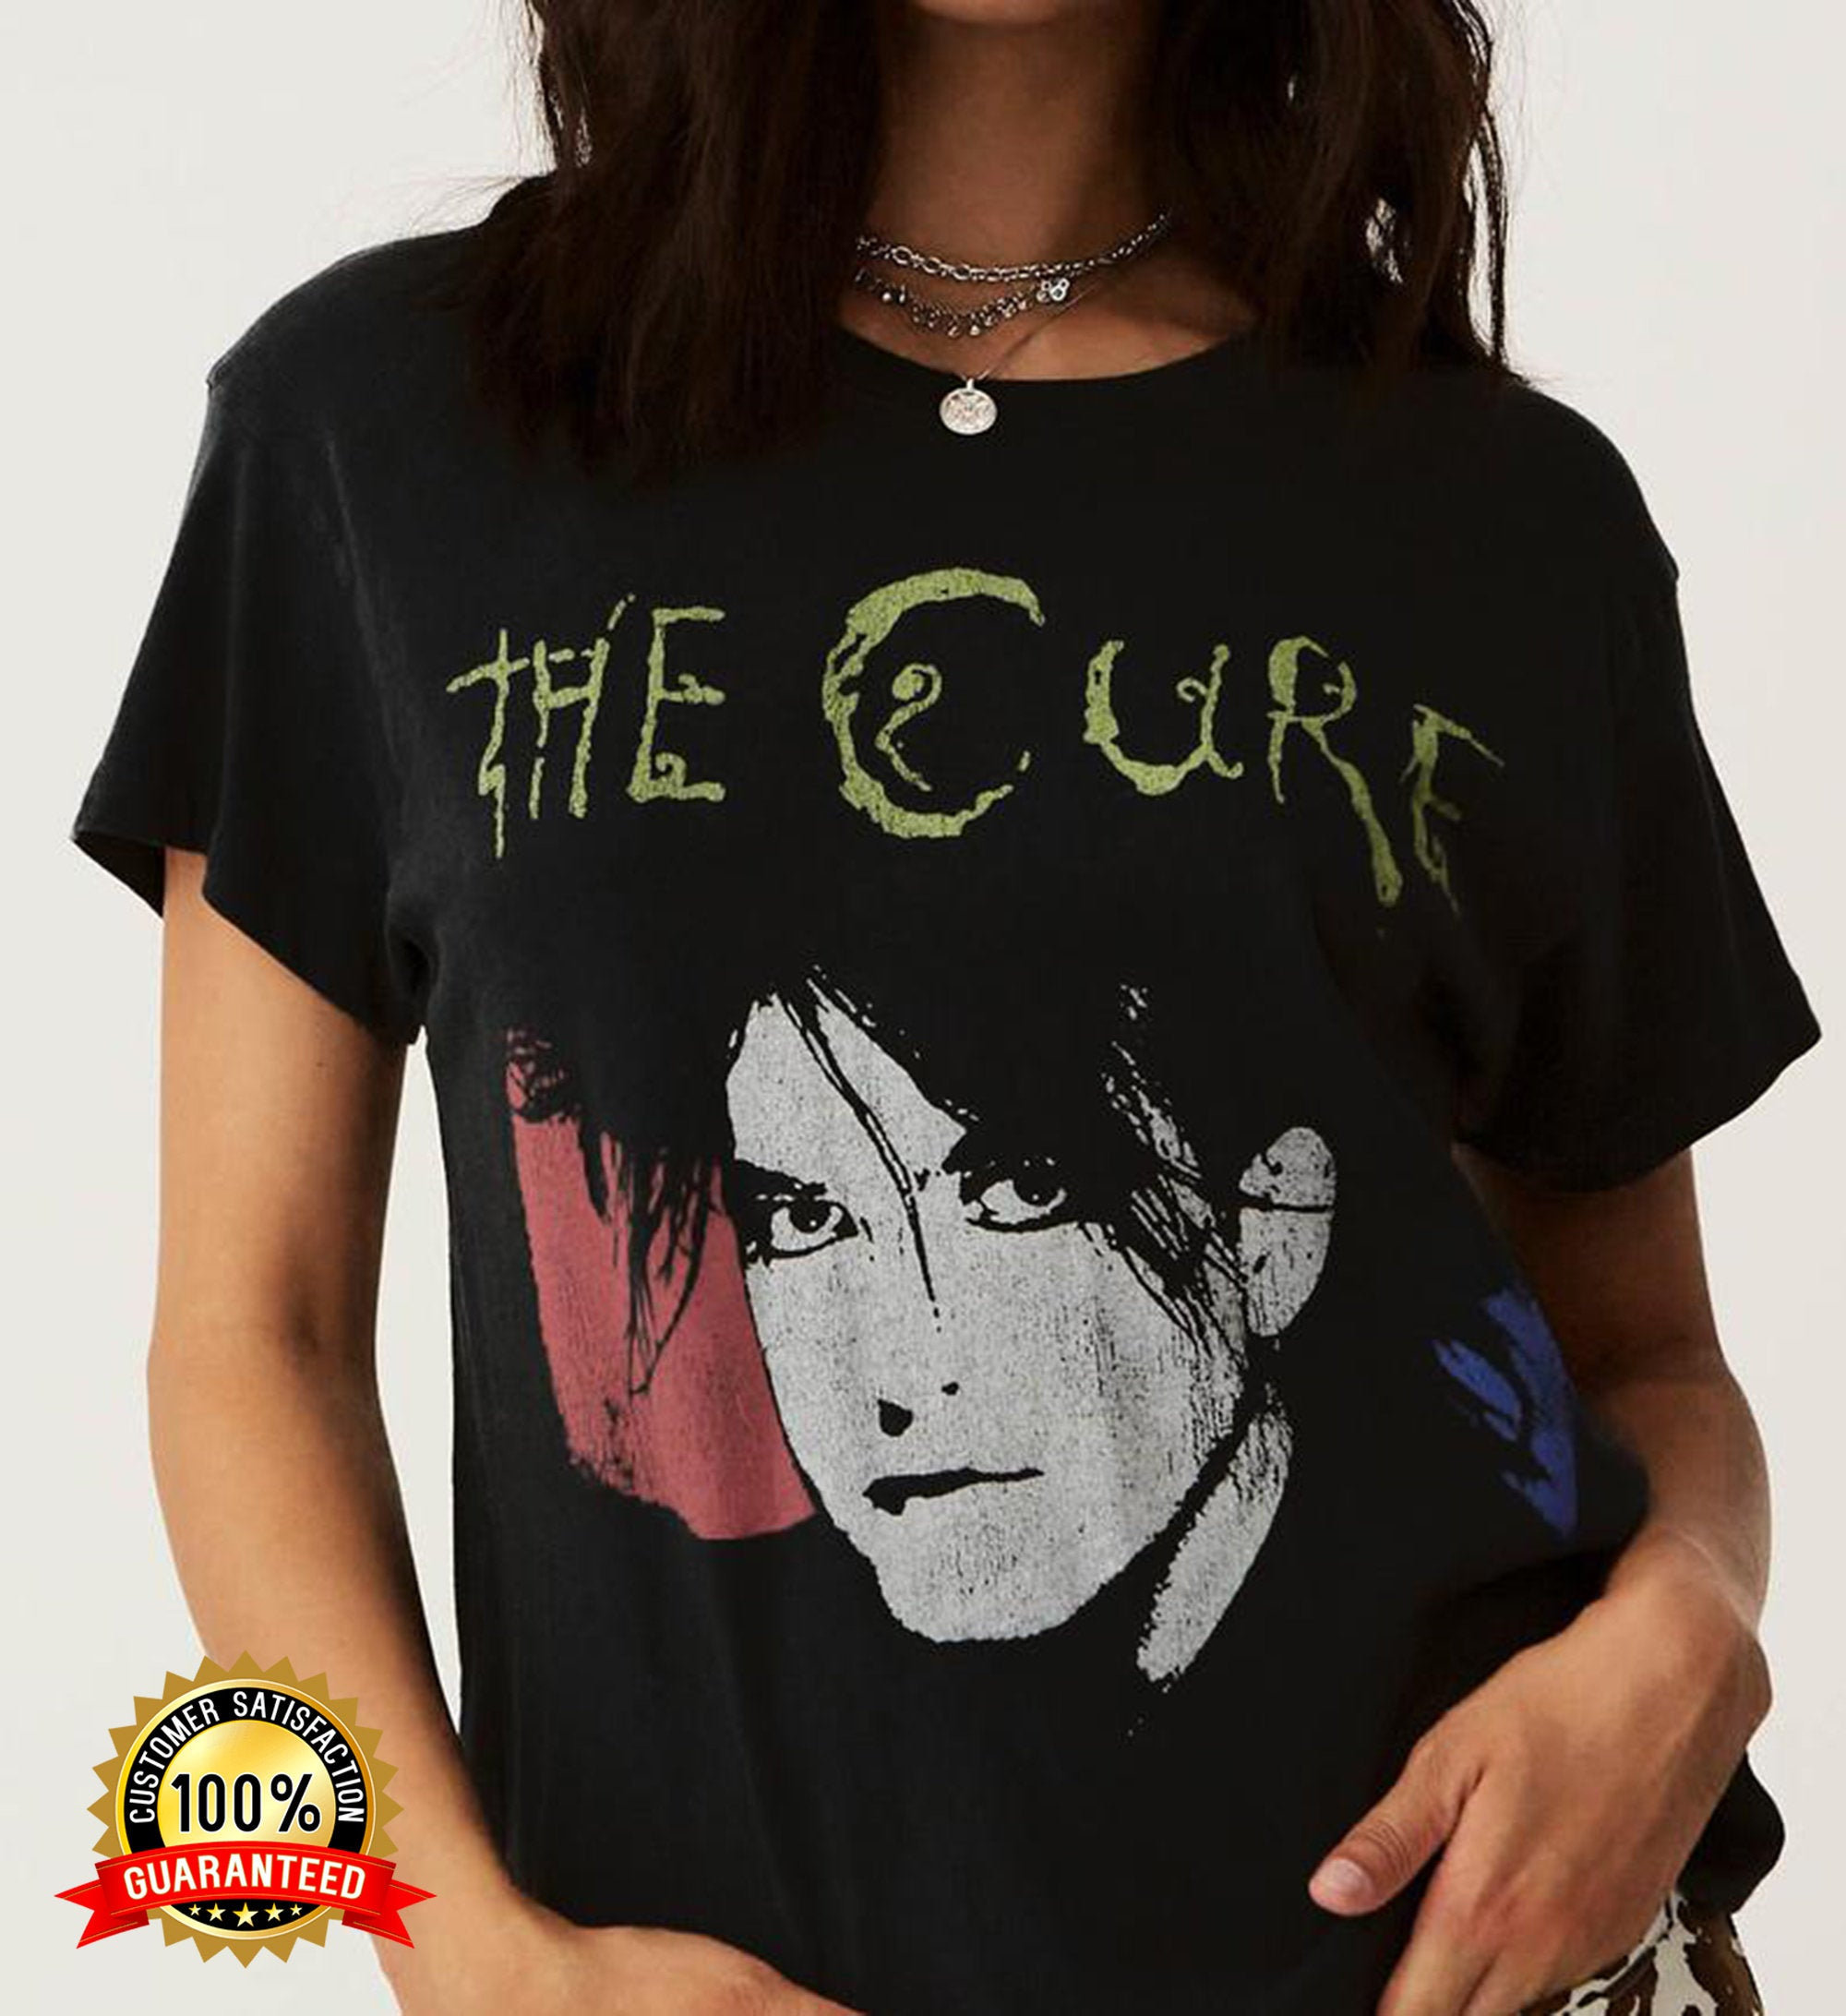 The Cure T-Shirt